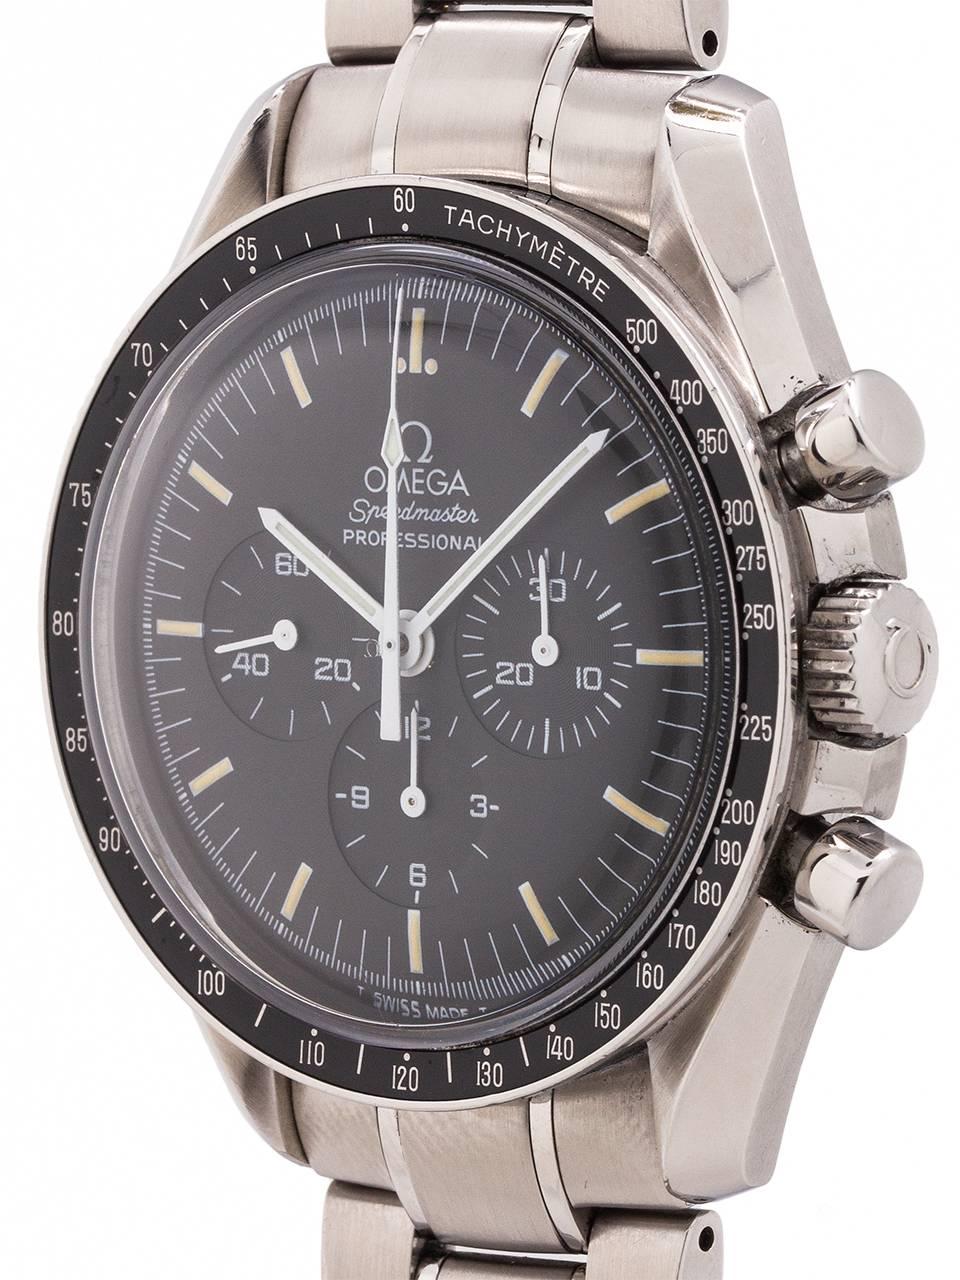 
An exceptional  condition preowned Omega Speedmaster Man on the Moon ref 3570.50 movement serial # 48,364,xxx, circa 1997. Featuring a 42mm diameter stainless steel case with black tachometer bezel,  black original dial with tritium indexes and